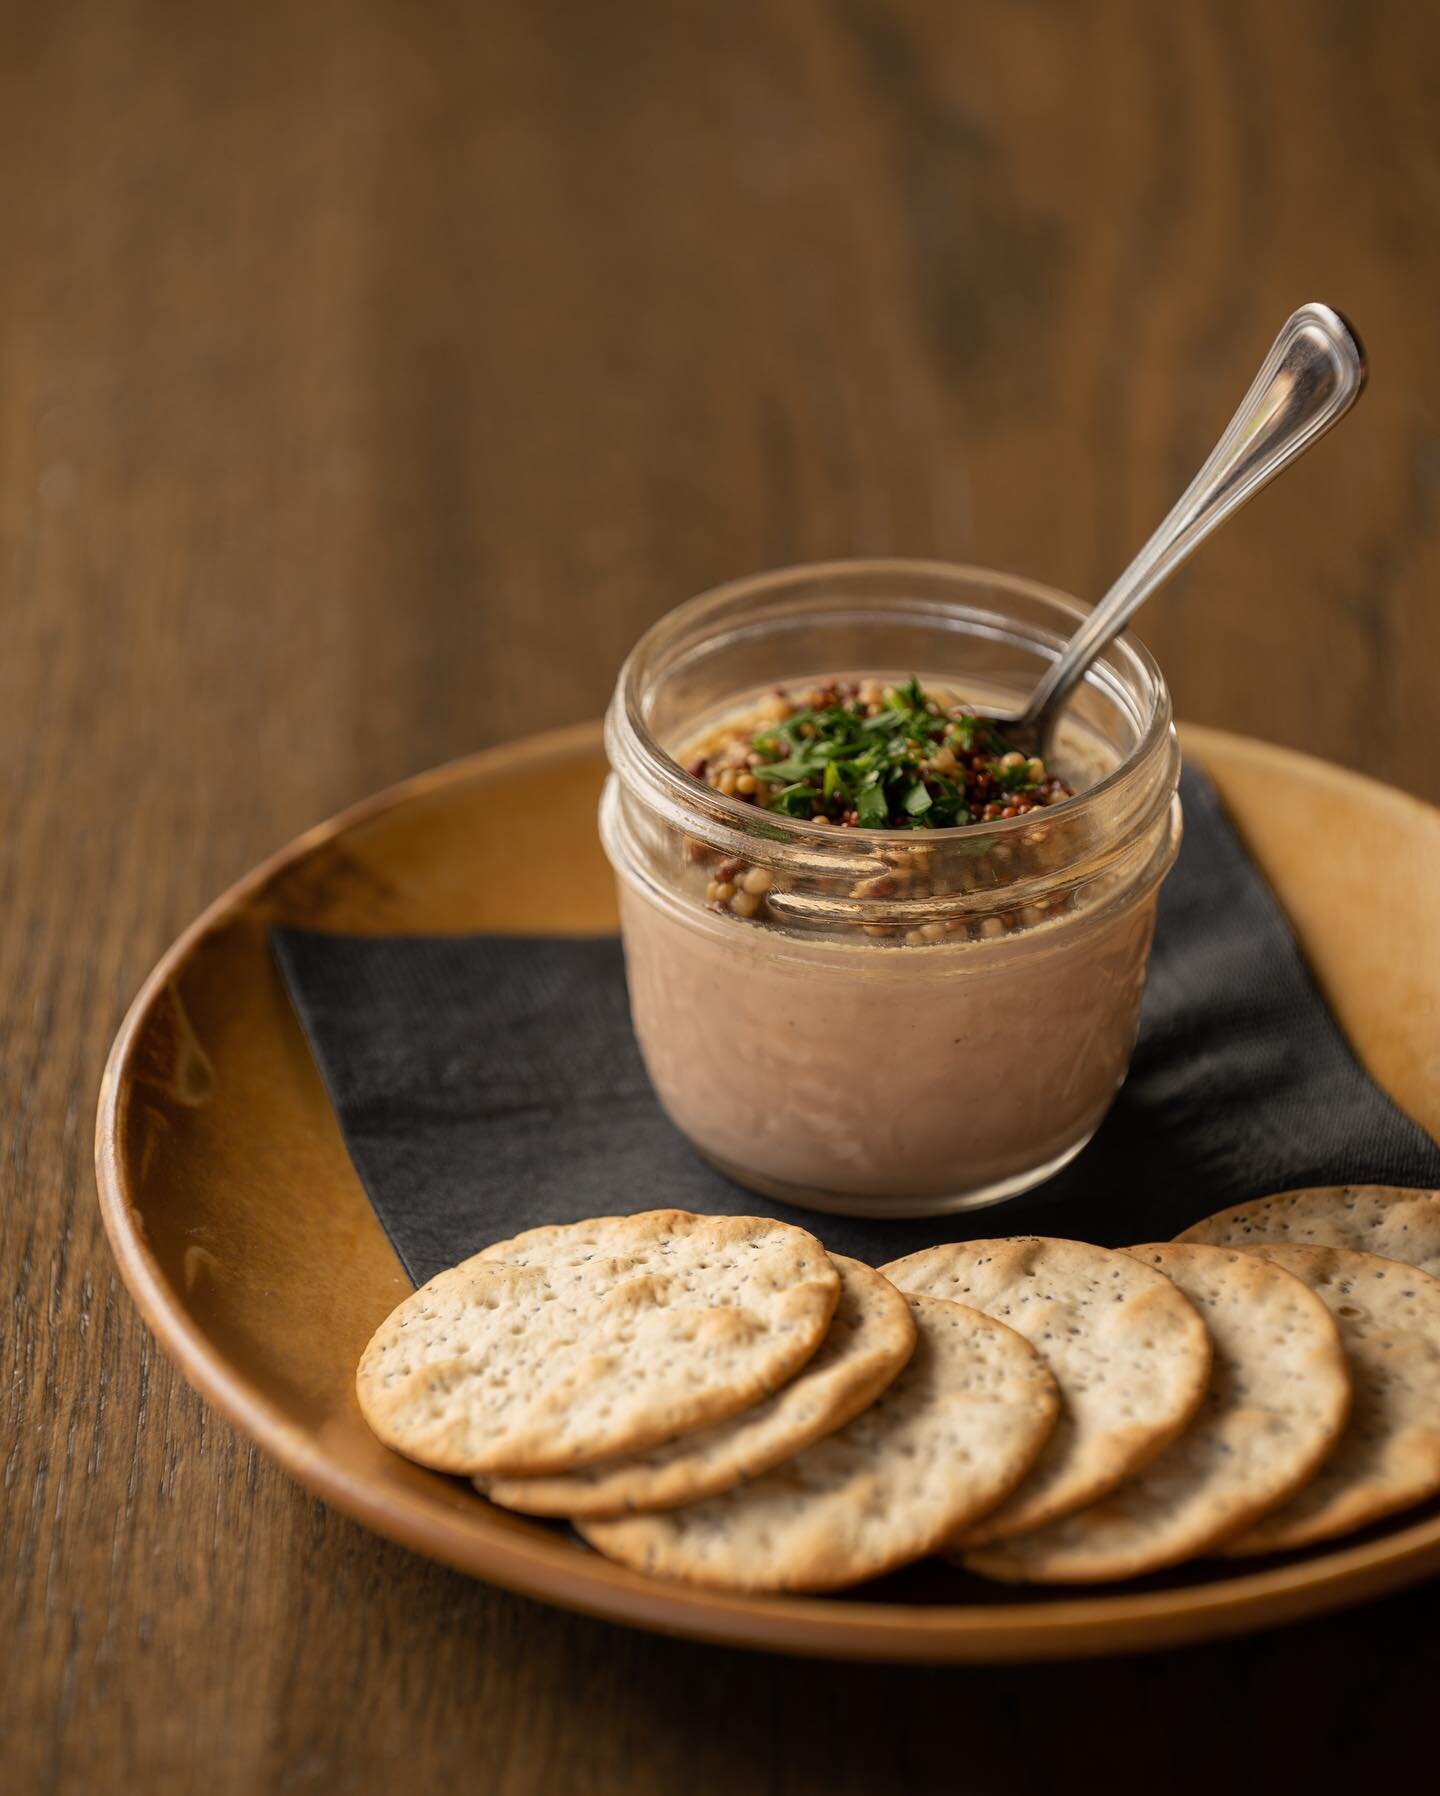 🌞 means less time in the kitchen and more time 😎 Make dinner easy with our ready to eat options, like Chicken Liver P&acirc;t&eacute; - just add crackers or bread!

Order online for next day pickup at thecuresk.com/shop. 

#supportlocalyxe #yxeeats